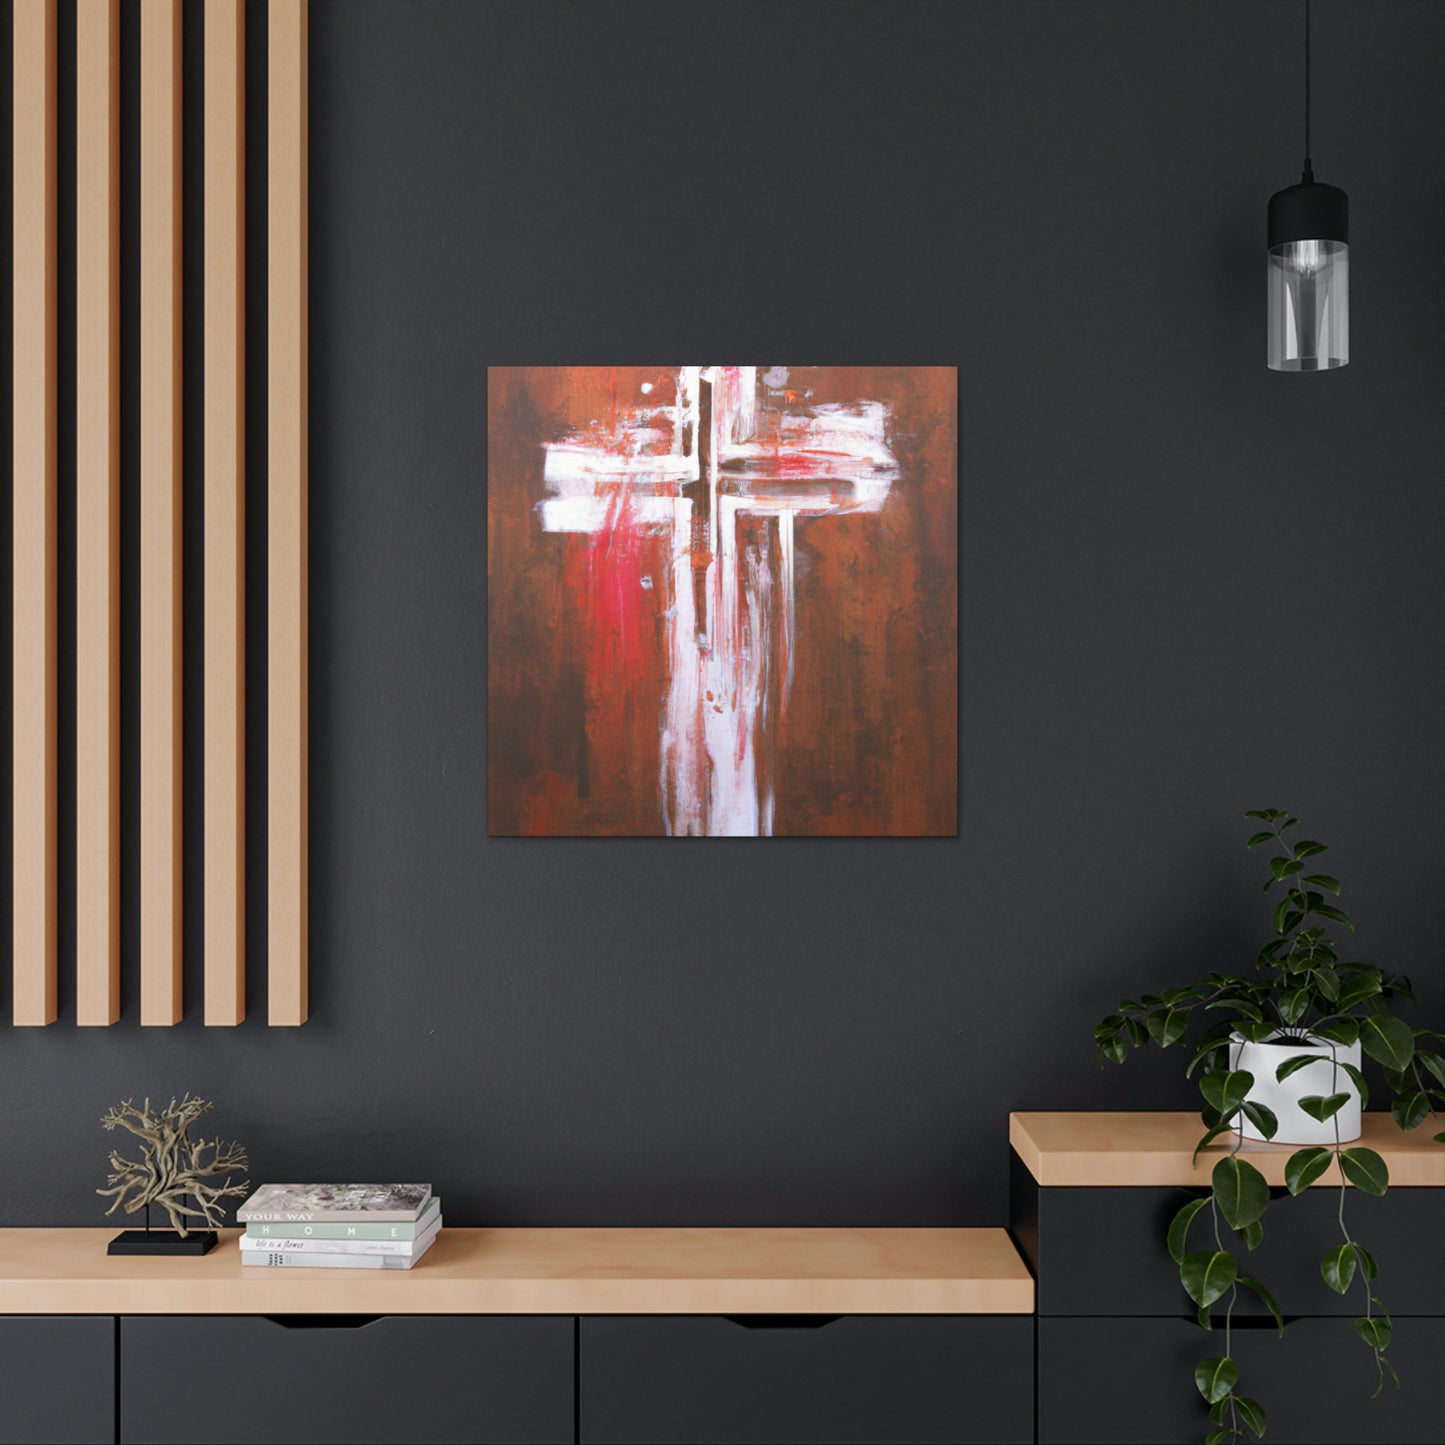 Hebrews 11:1 
"Now faith is confidence in what we hope for and assurance about what we do not see.” - Canvas Wall Art